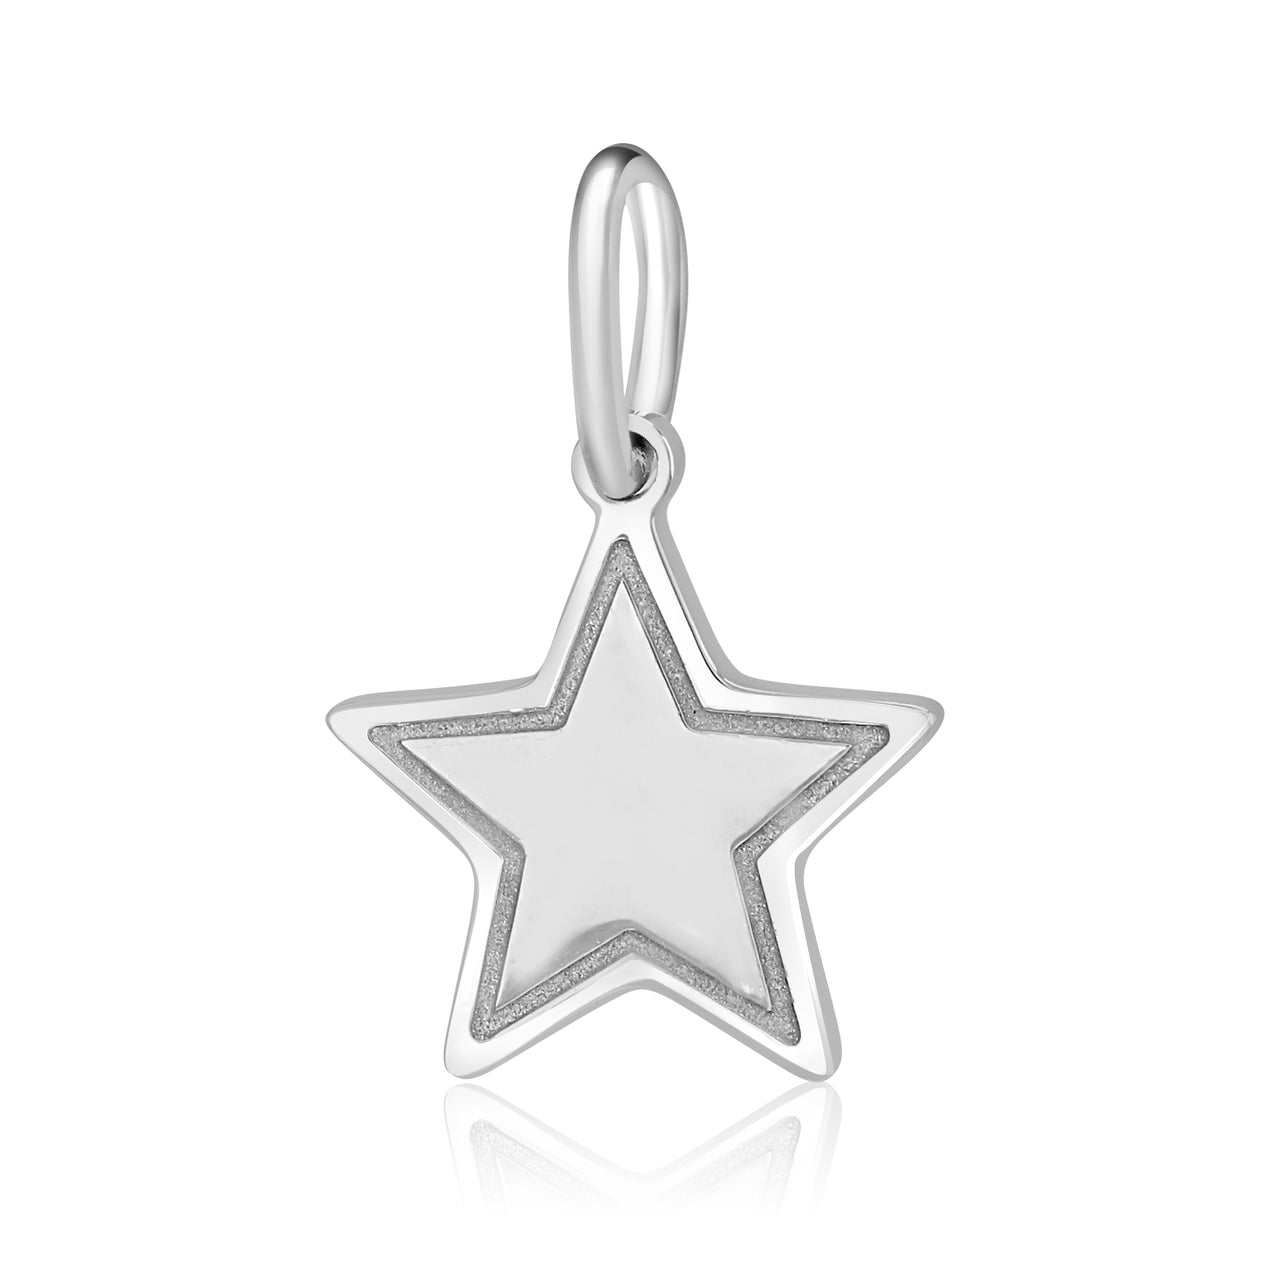 Silver Star charm with sparkly enamel